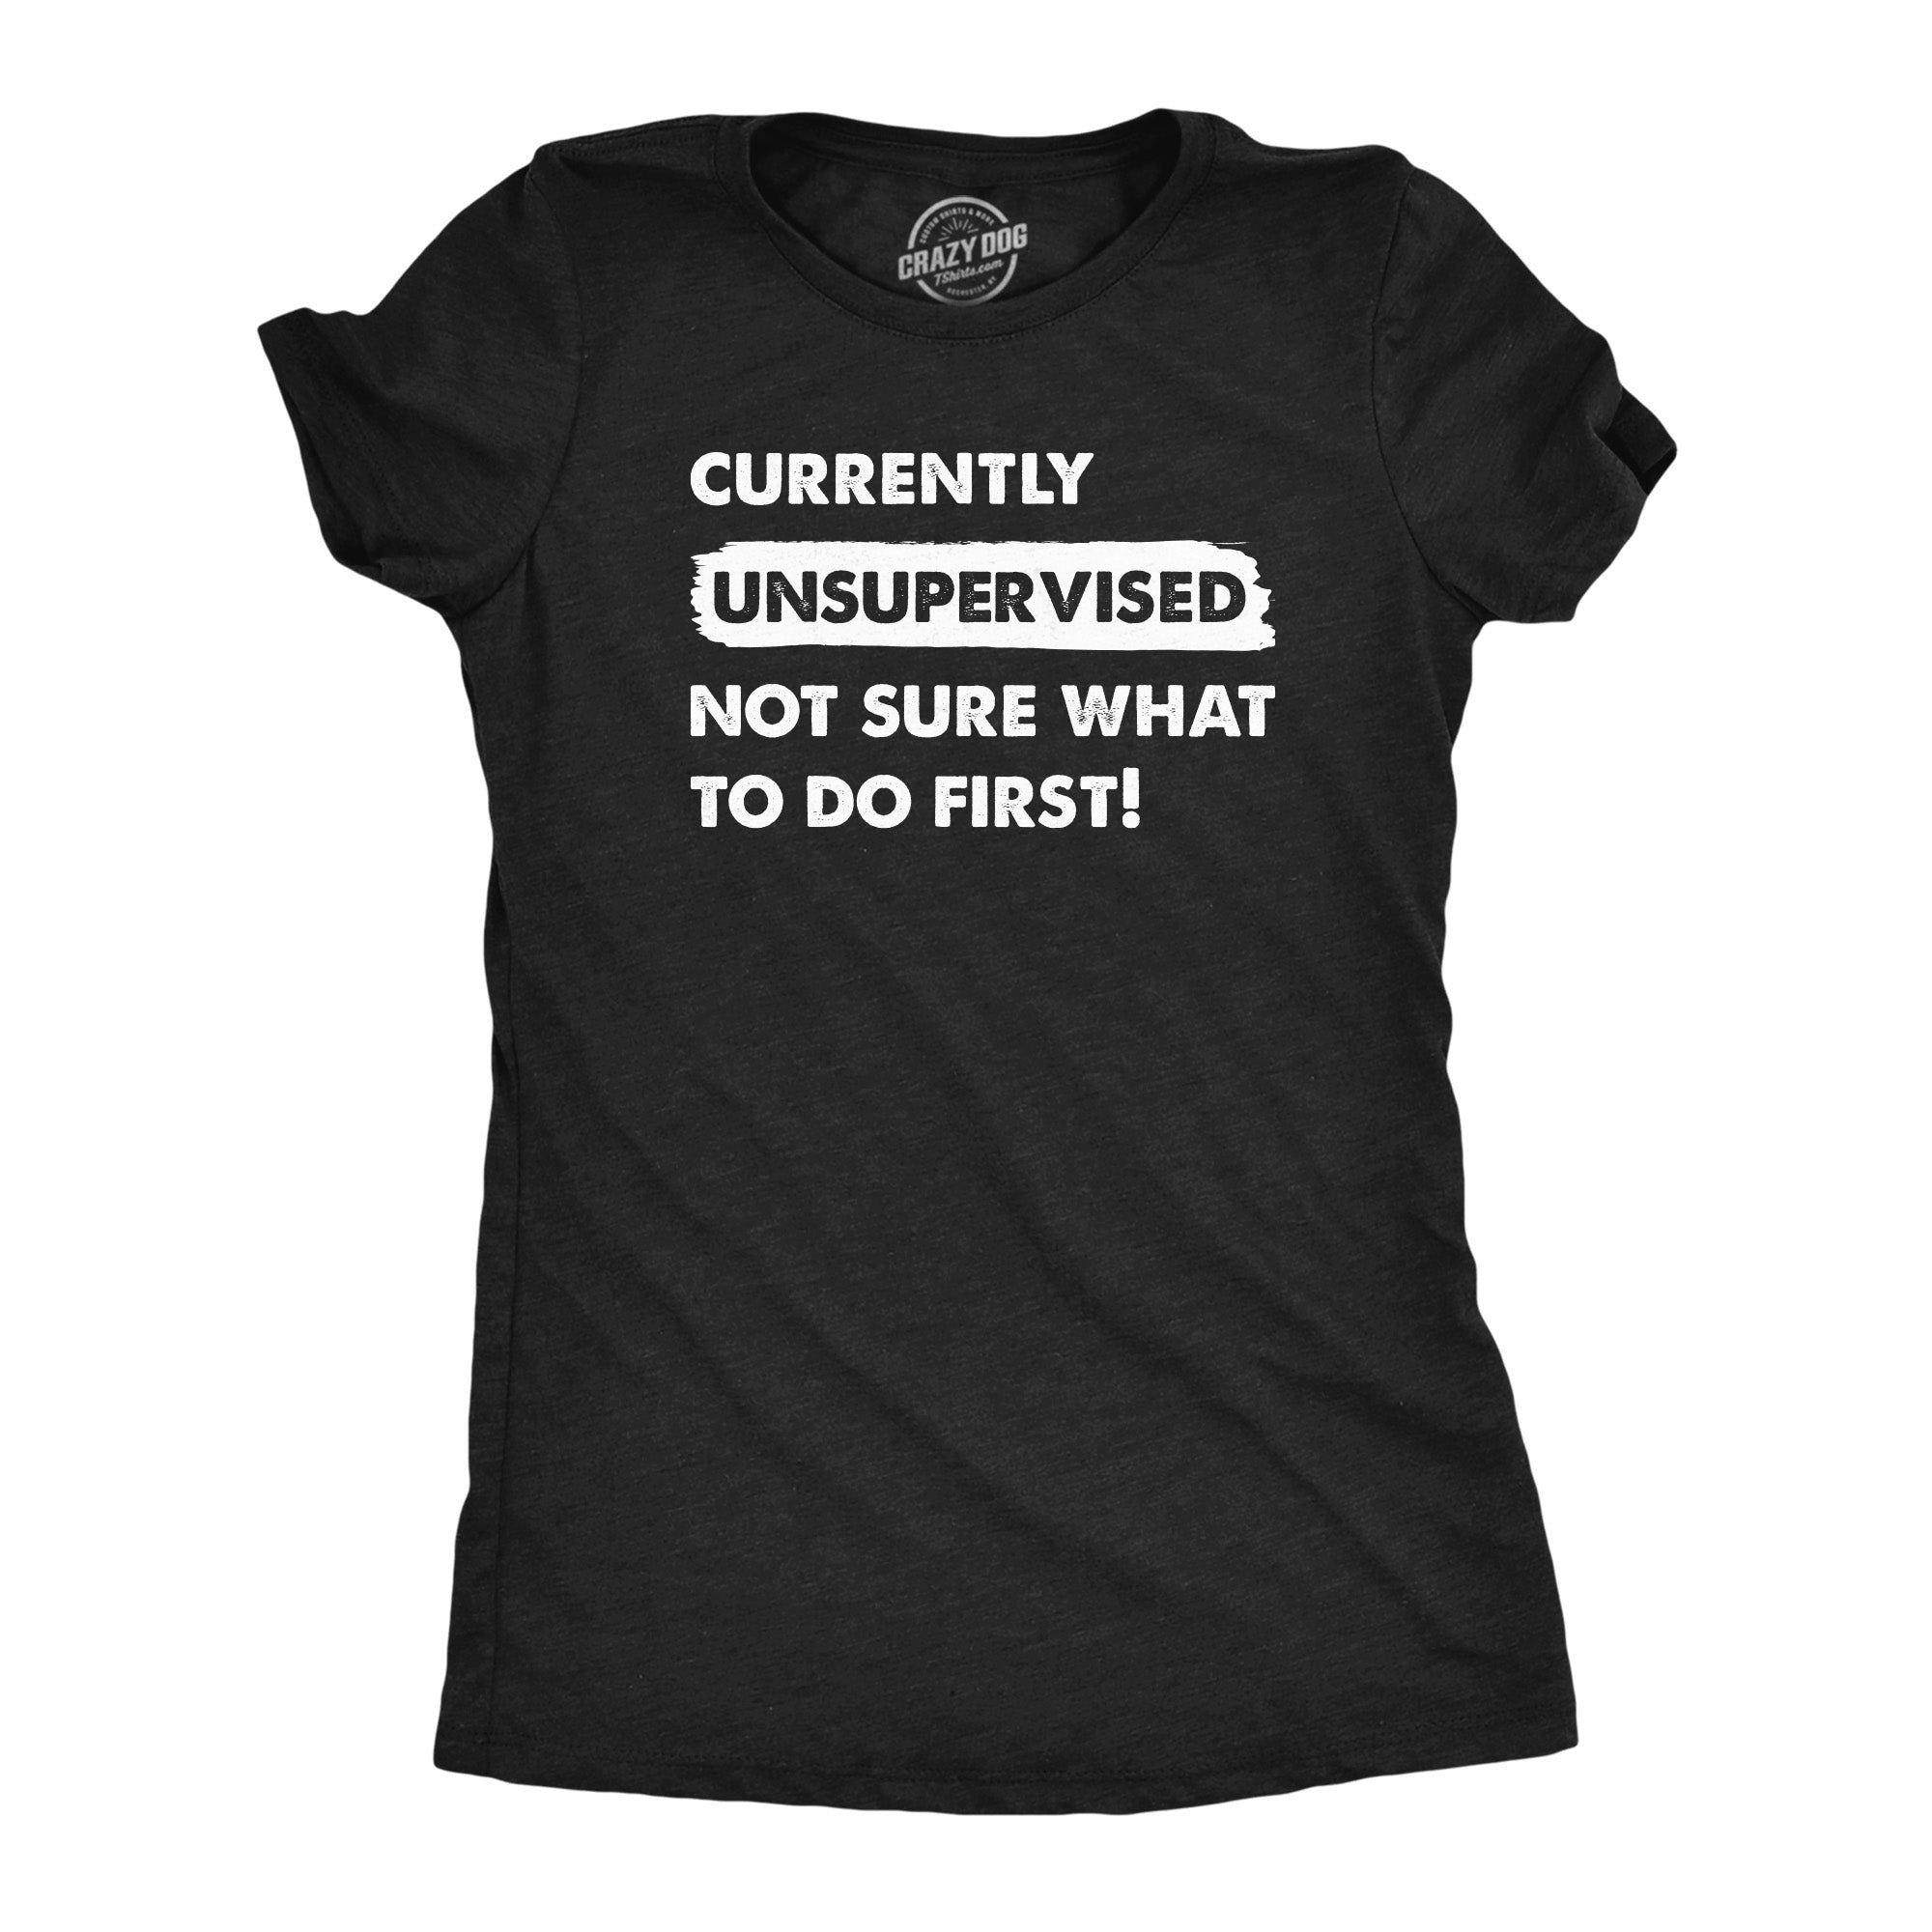 Funny Heather Black - UNSUPERVISED Currently Unsupervised Not Sure What To Do First Womens T Shirt Nerdy Sarcastic Tee